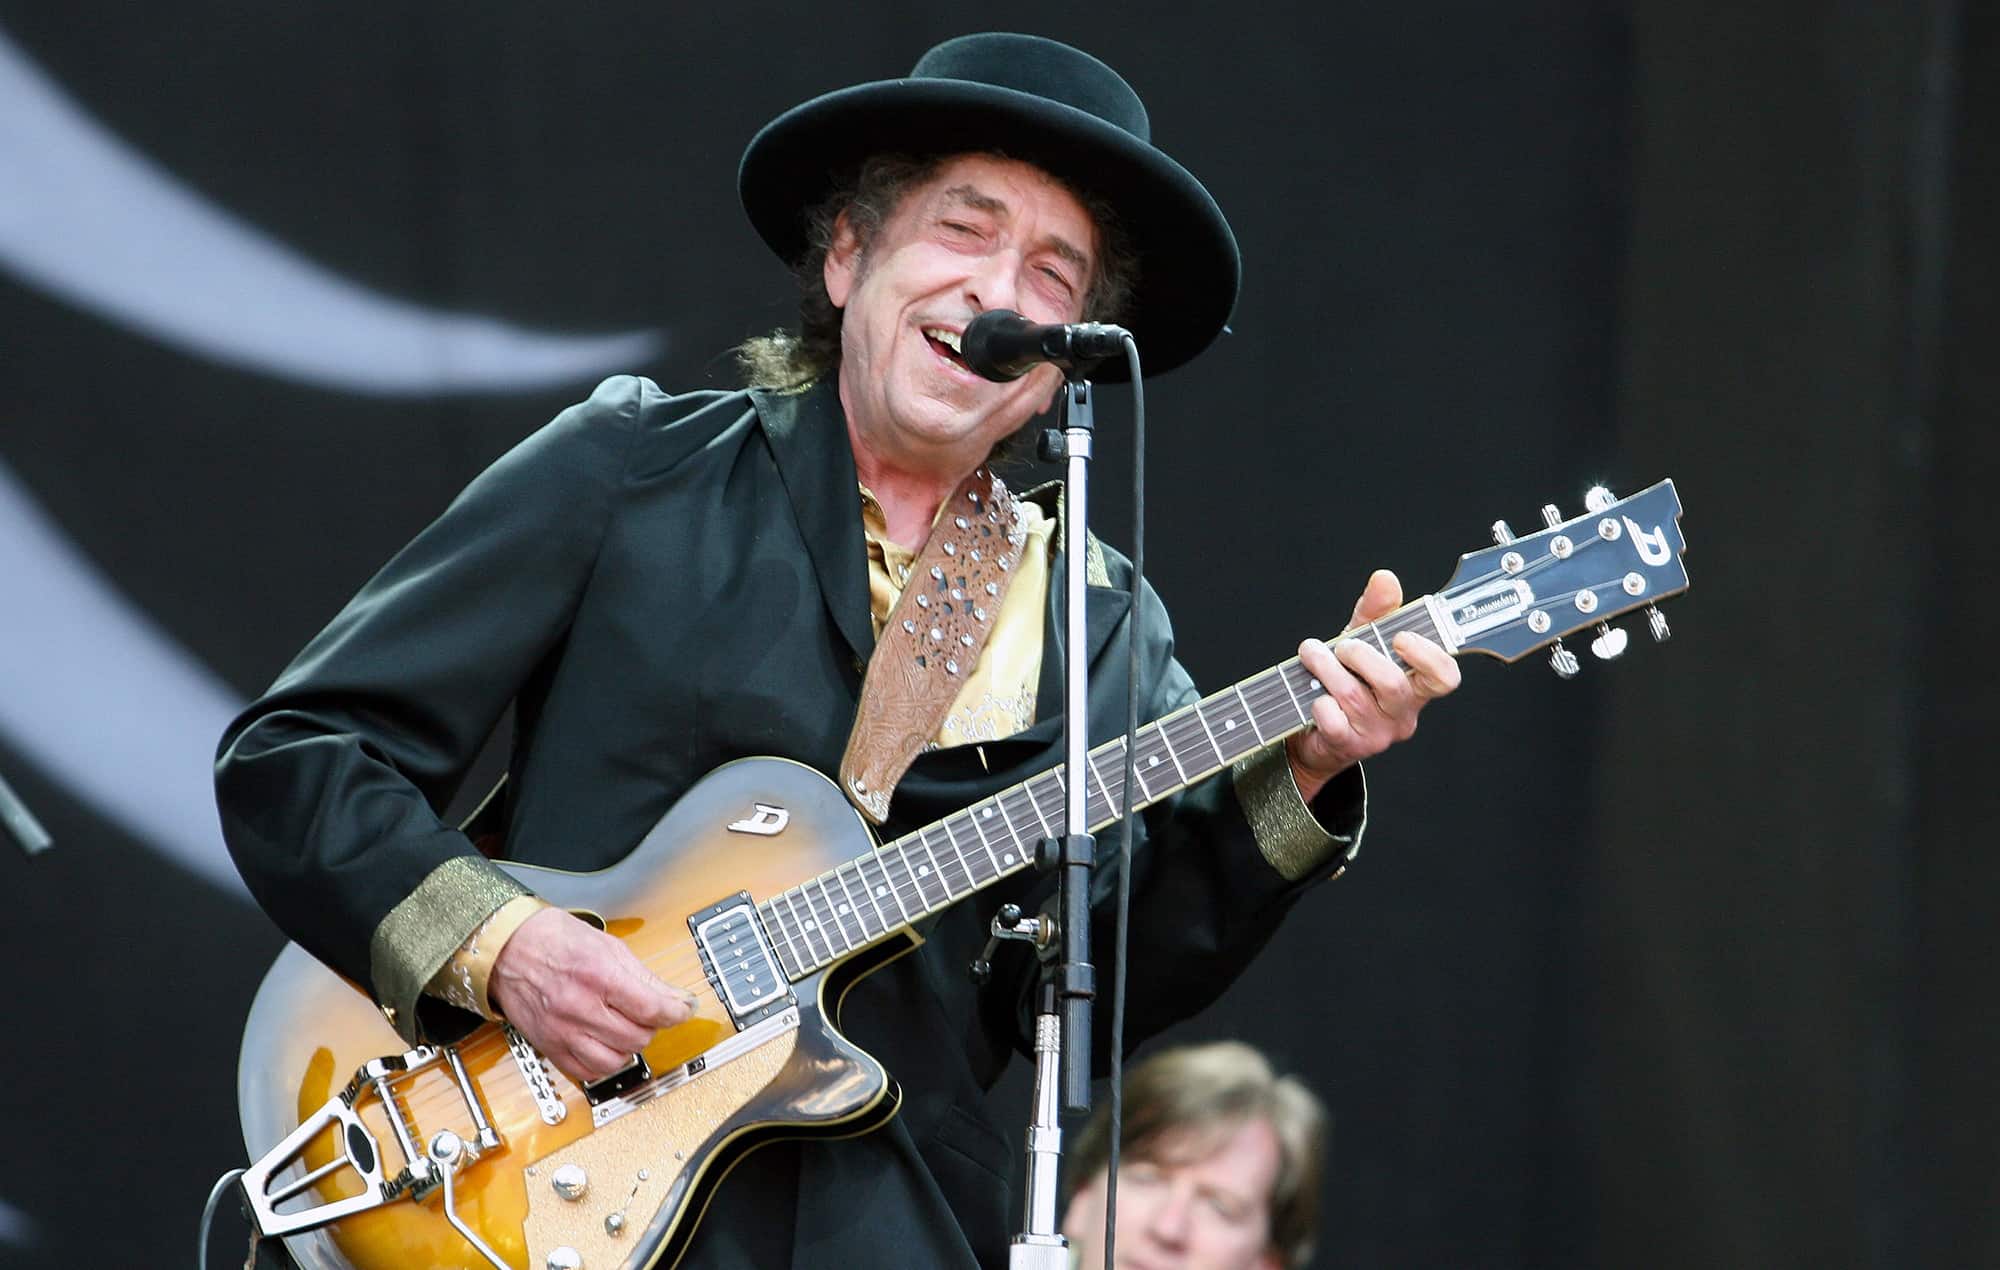 Bob Dylan's recorded music catalog acquired in full by Sony Music Entertainment